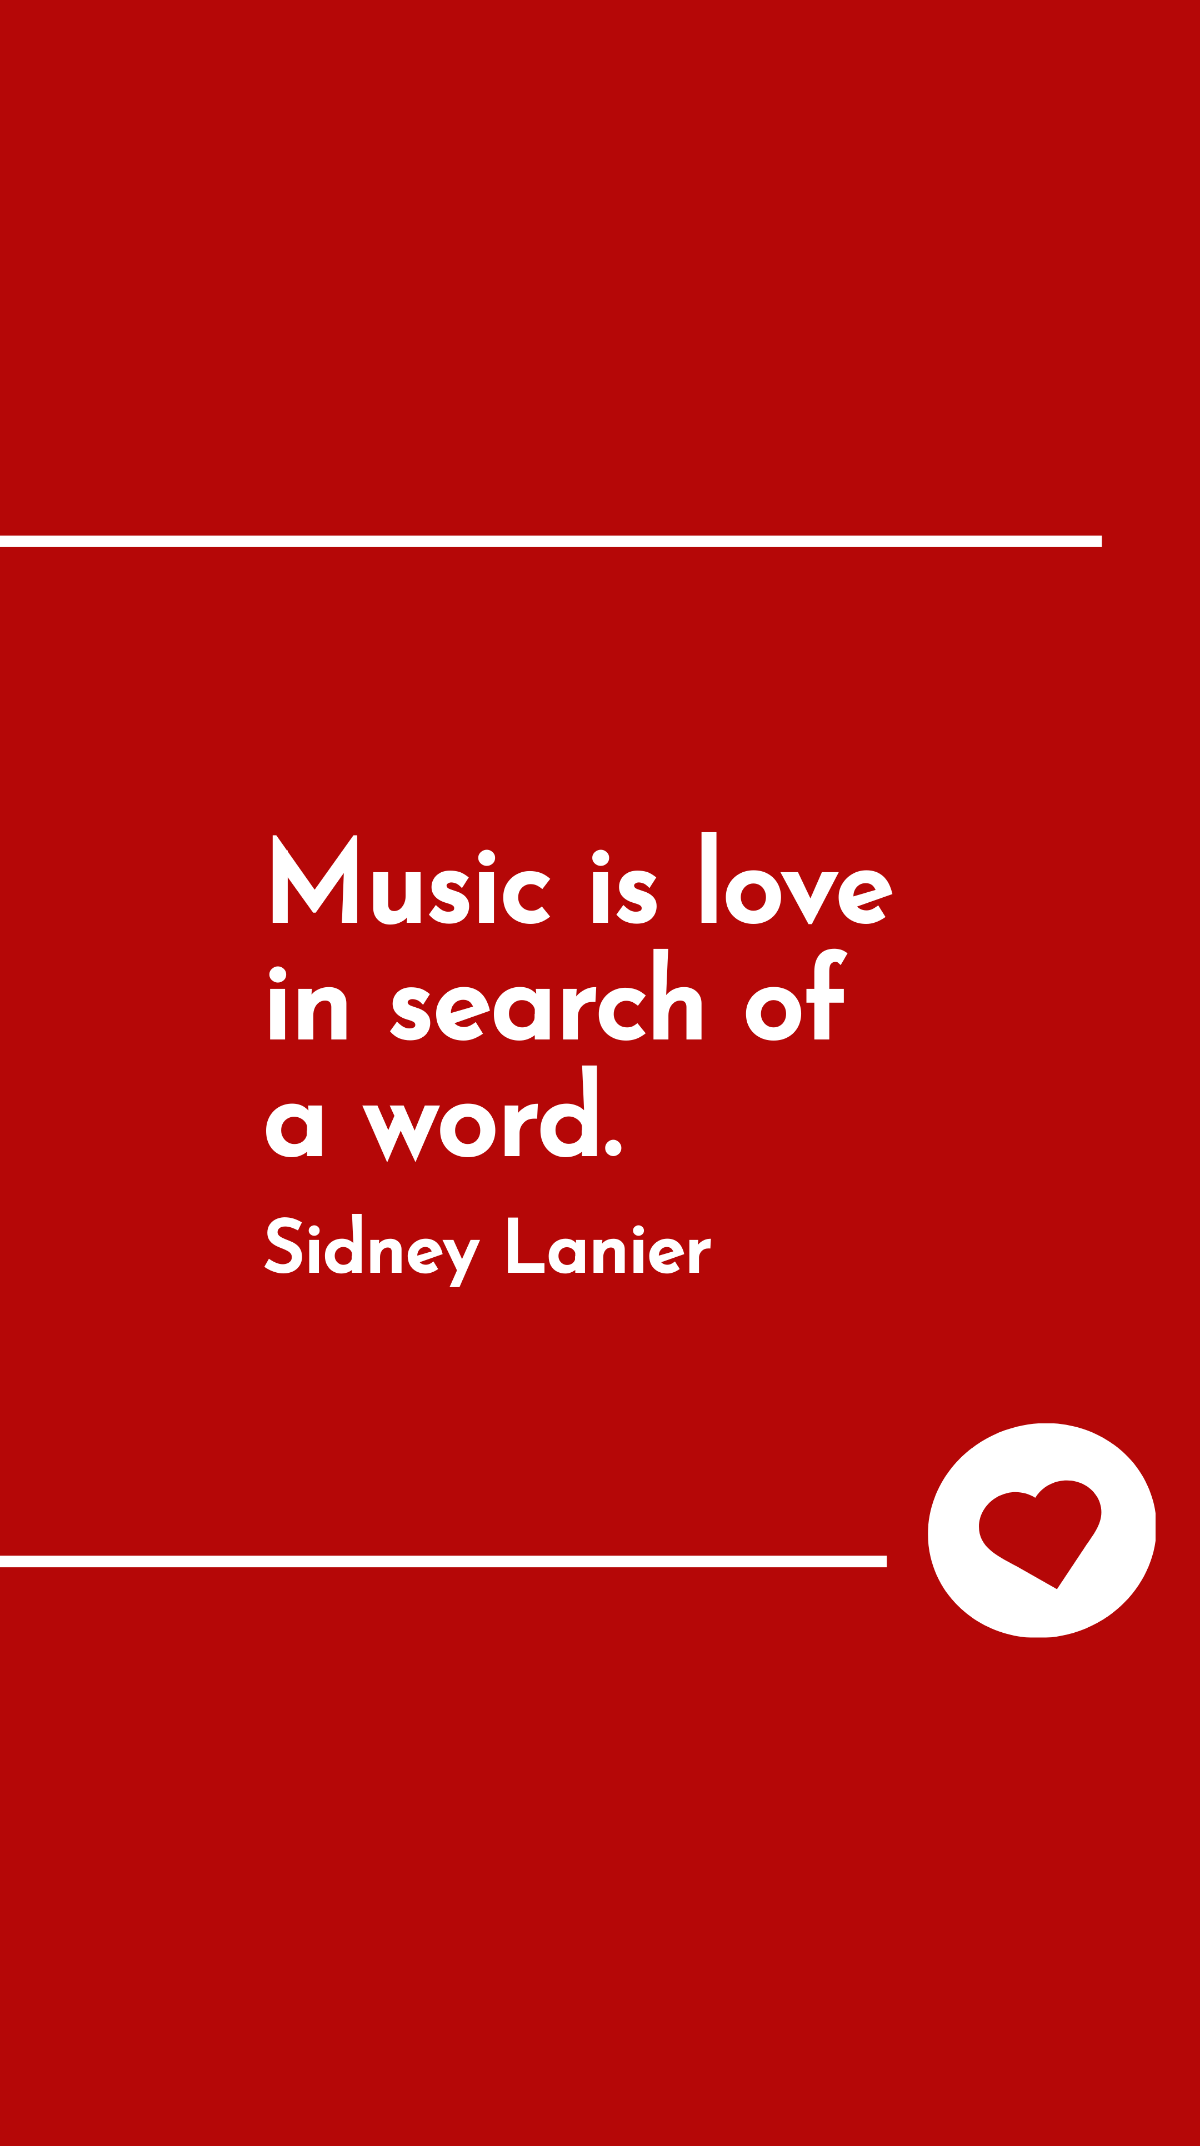 Sidney Lanier - Music is love in search of a word.